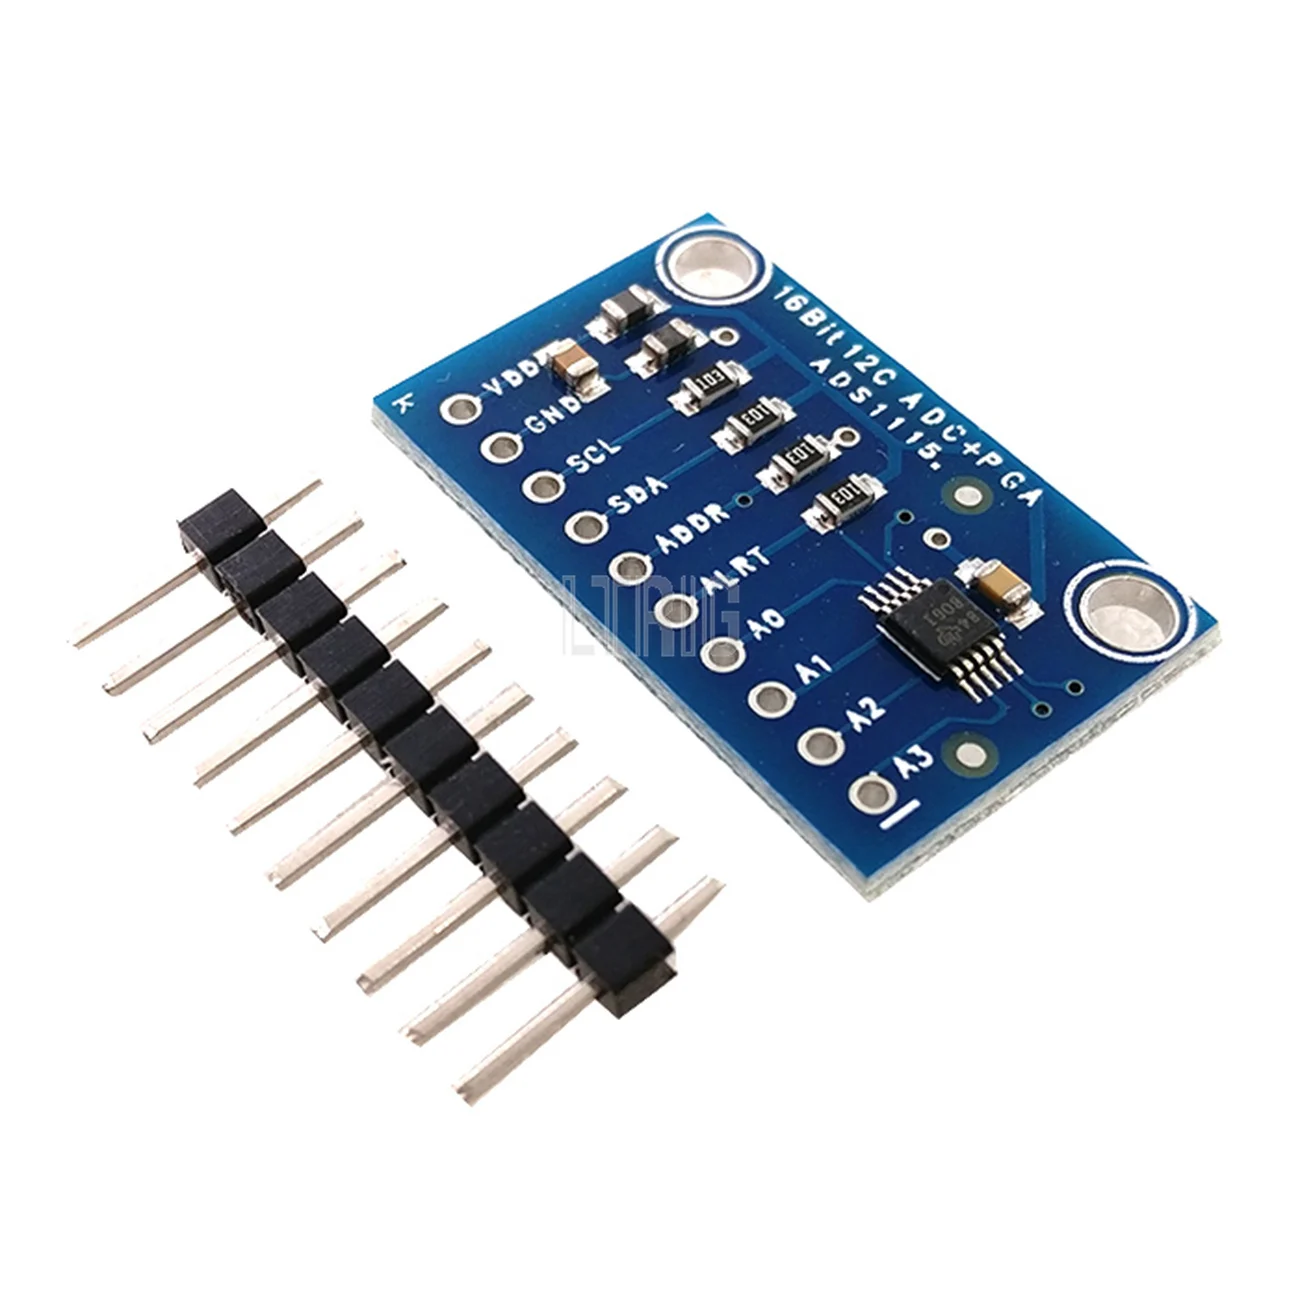 

LTRIG custom 1Pcs 16 Bit I2C ADS1115 Module ADC 4 channel with Pro Gain Amplifier for arduino RPi